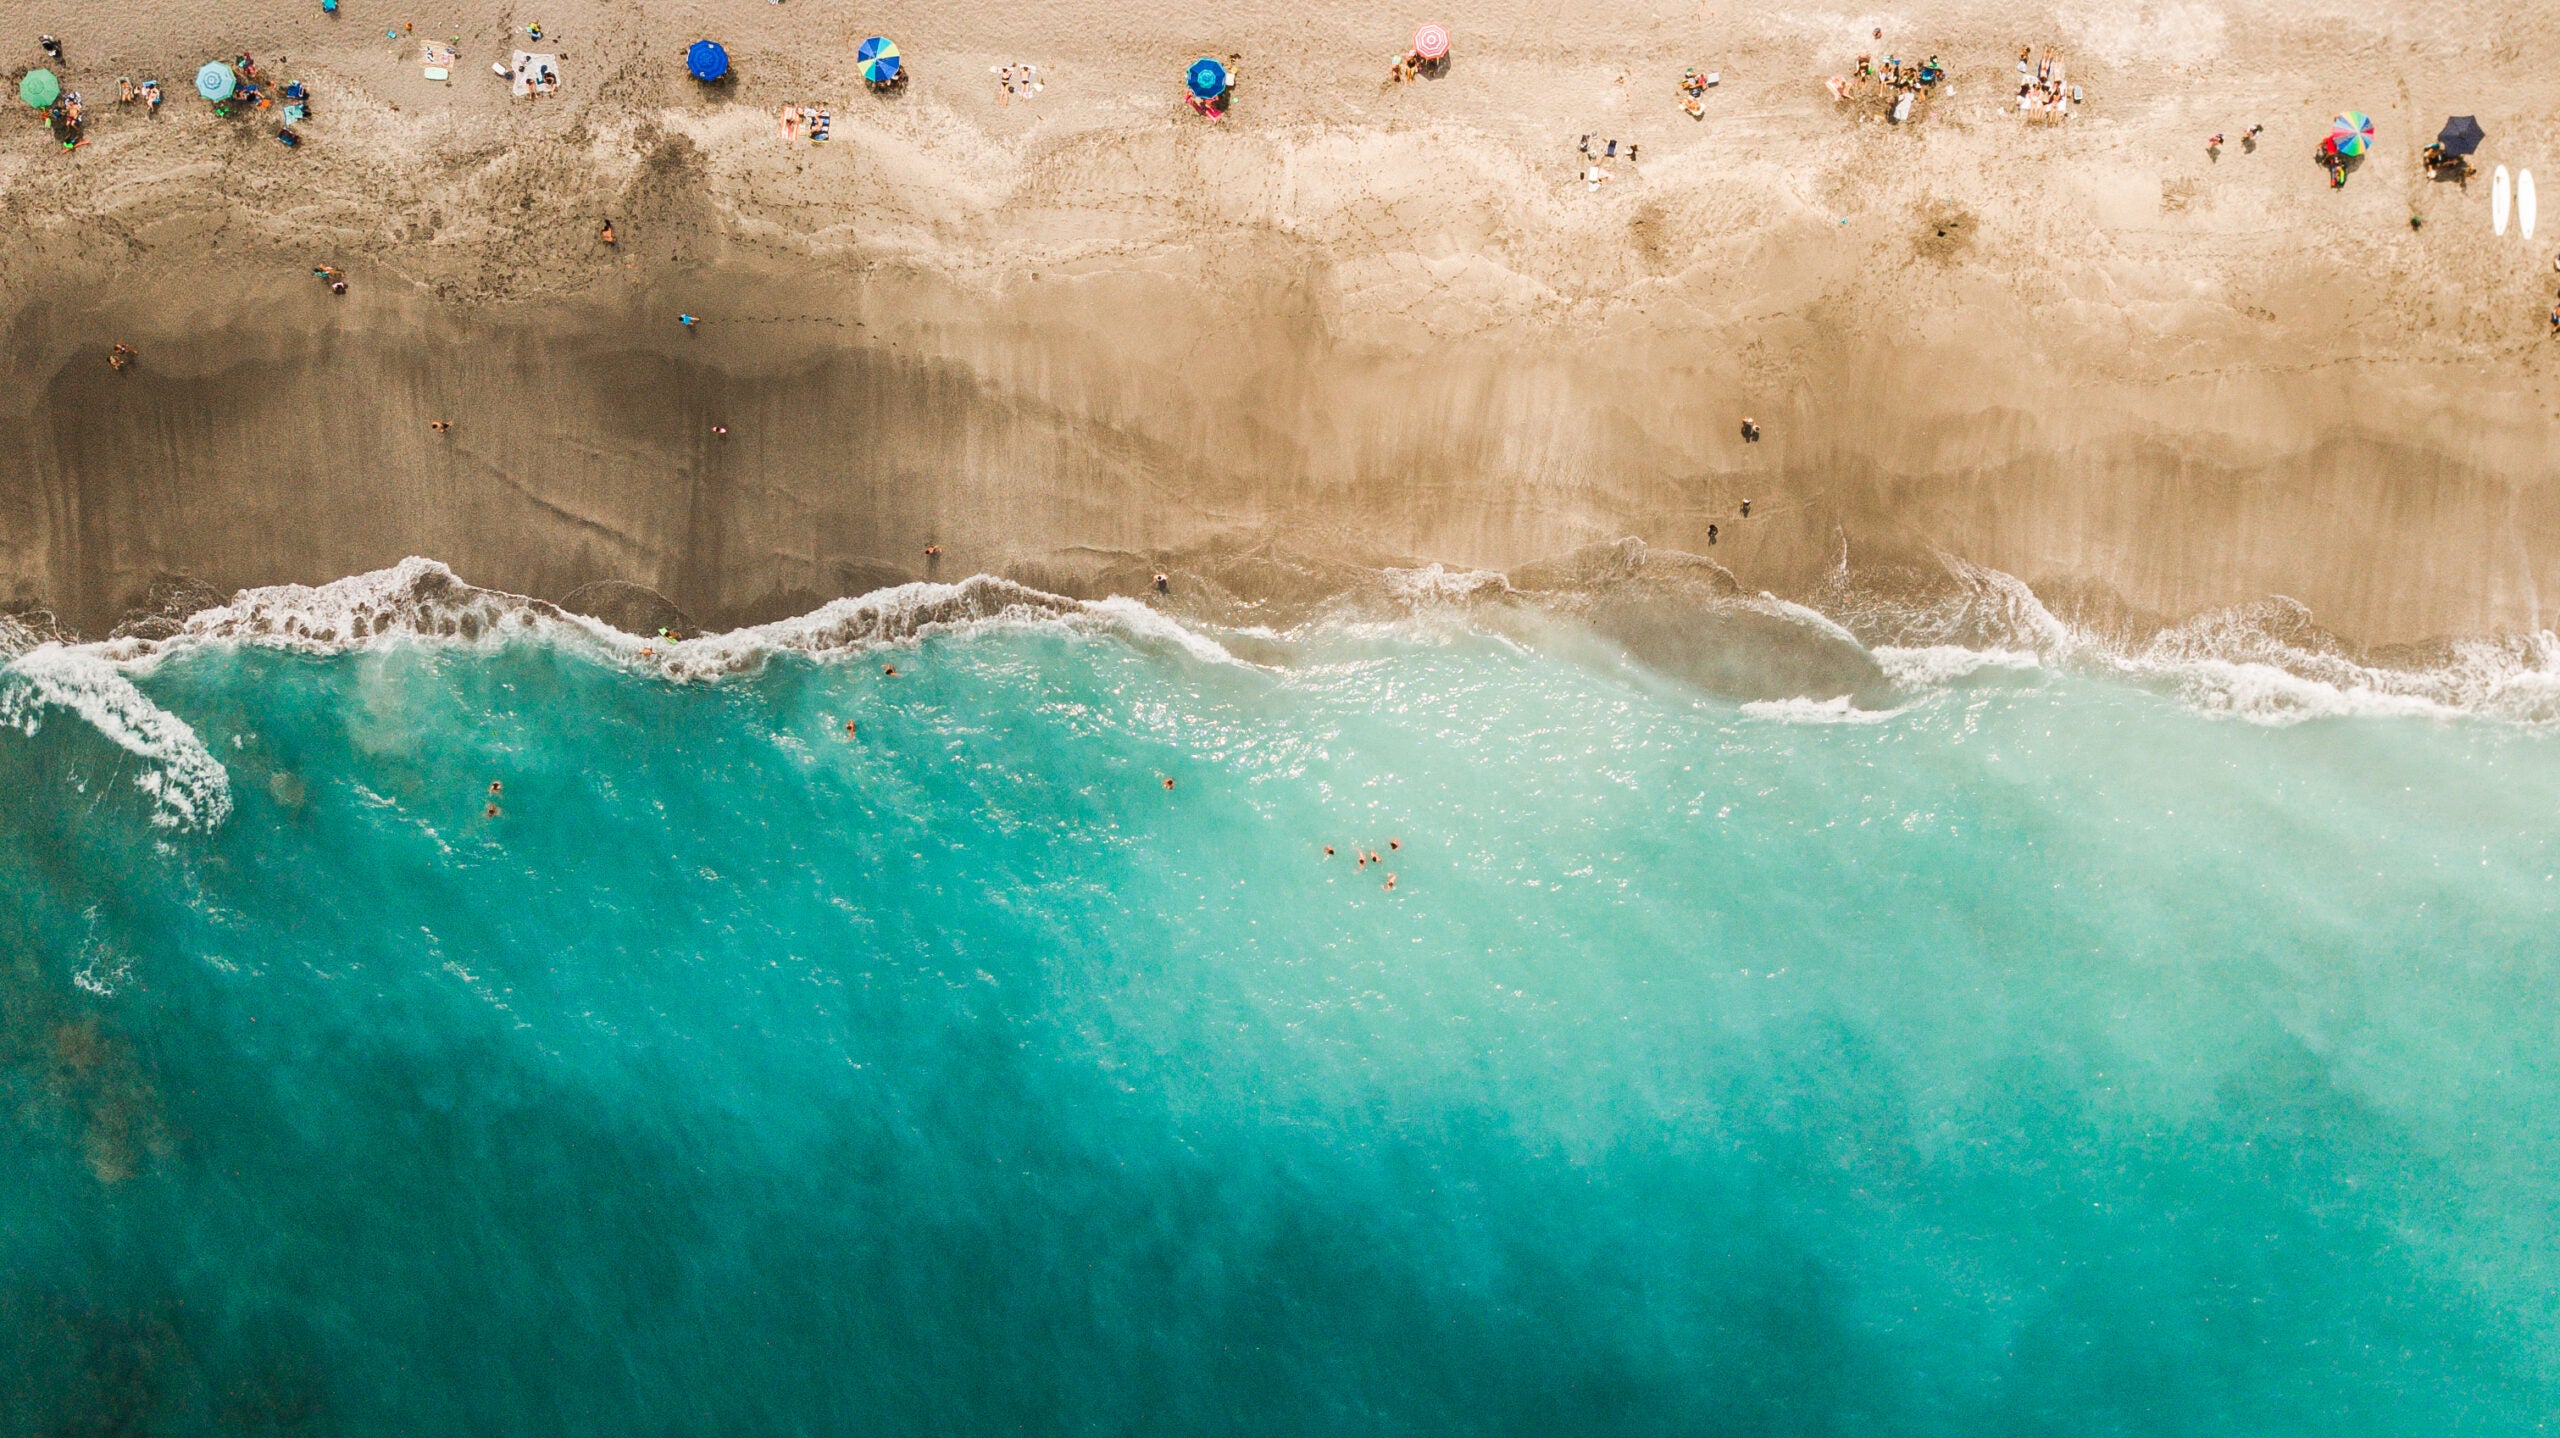 Direct Aerial Overview of a Vibrant Teal Ocean Seashore and Colorful Beach Umbrellas on Jupiter, Florida at Mid-Day During COVID-19 in April of 2021